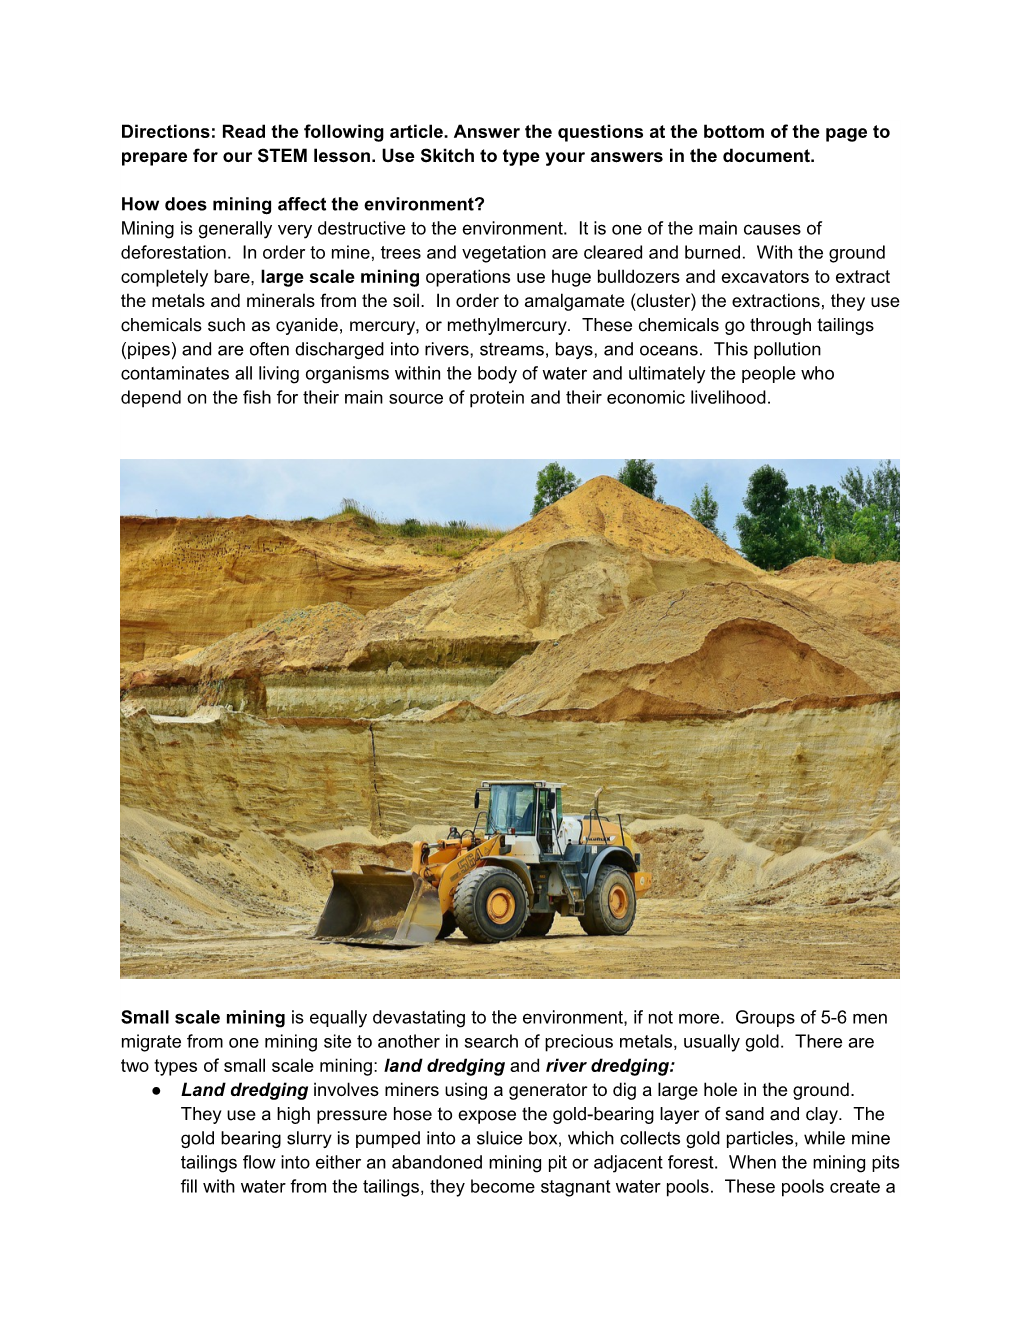 How Does Mining Affect the Environment?